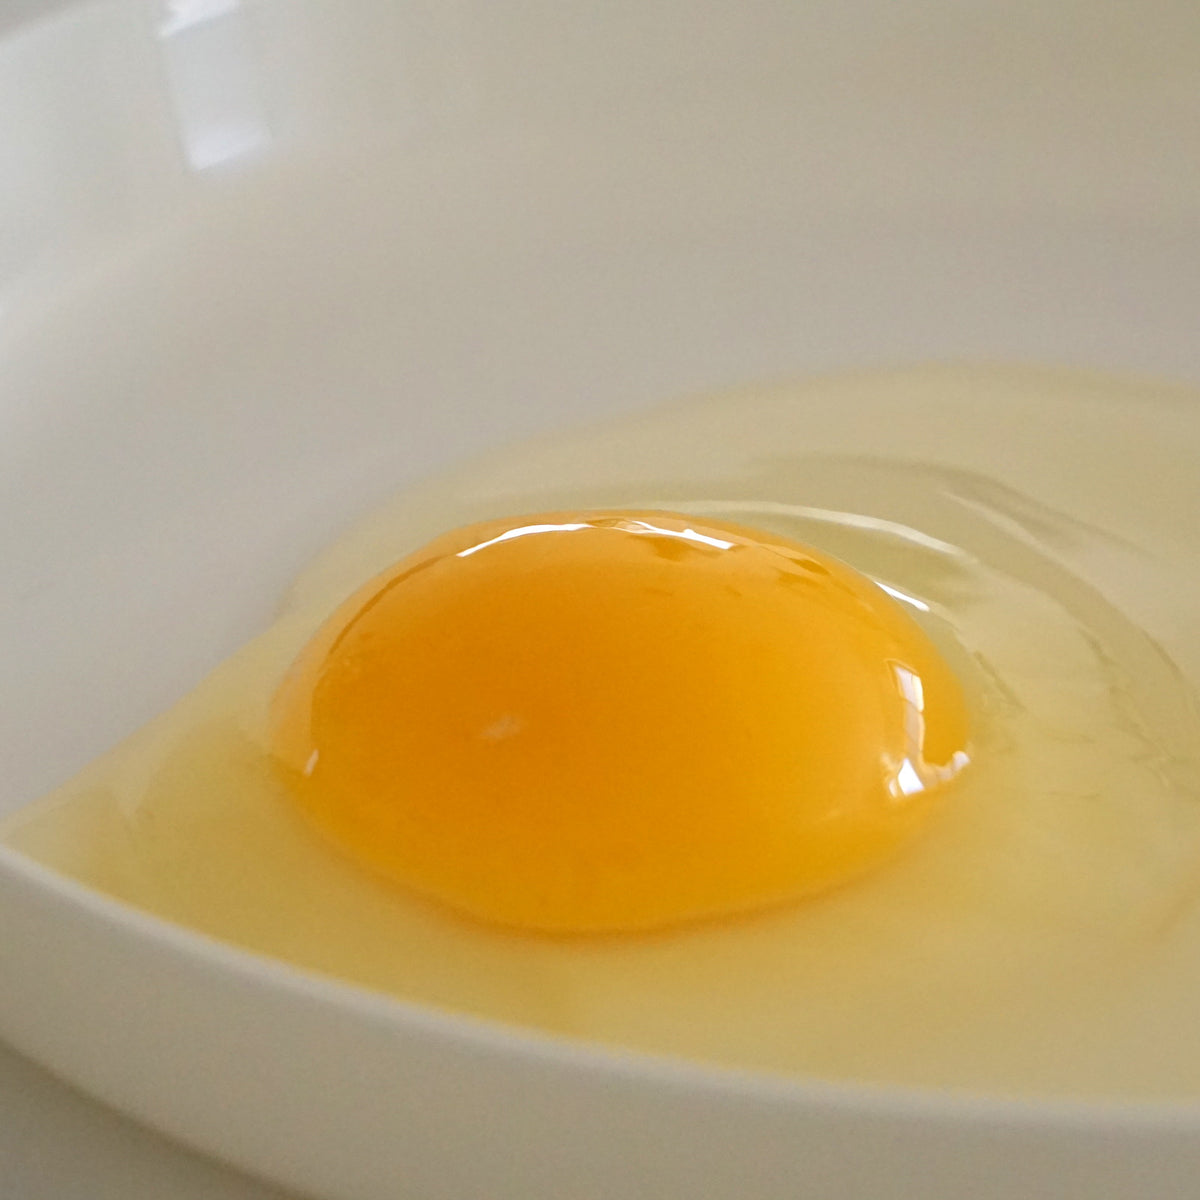 Real Free-Range Raw Eggs from Japan (12 Eggs) (Terms & Conditions Apply) - Horizon Farms